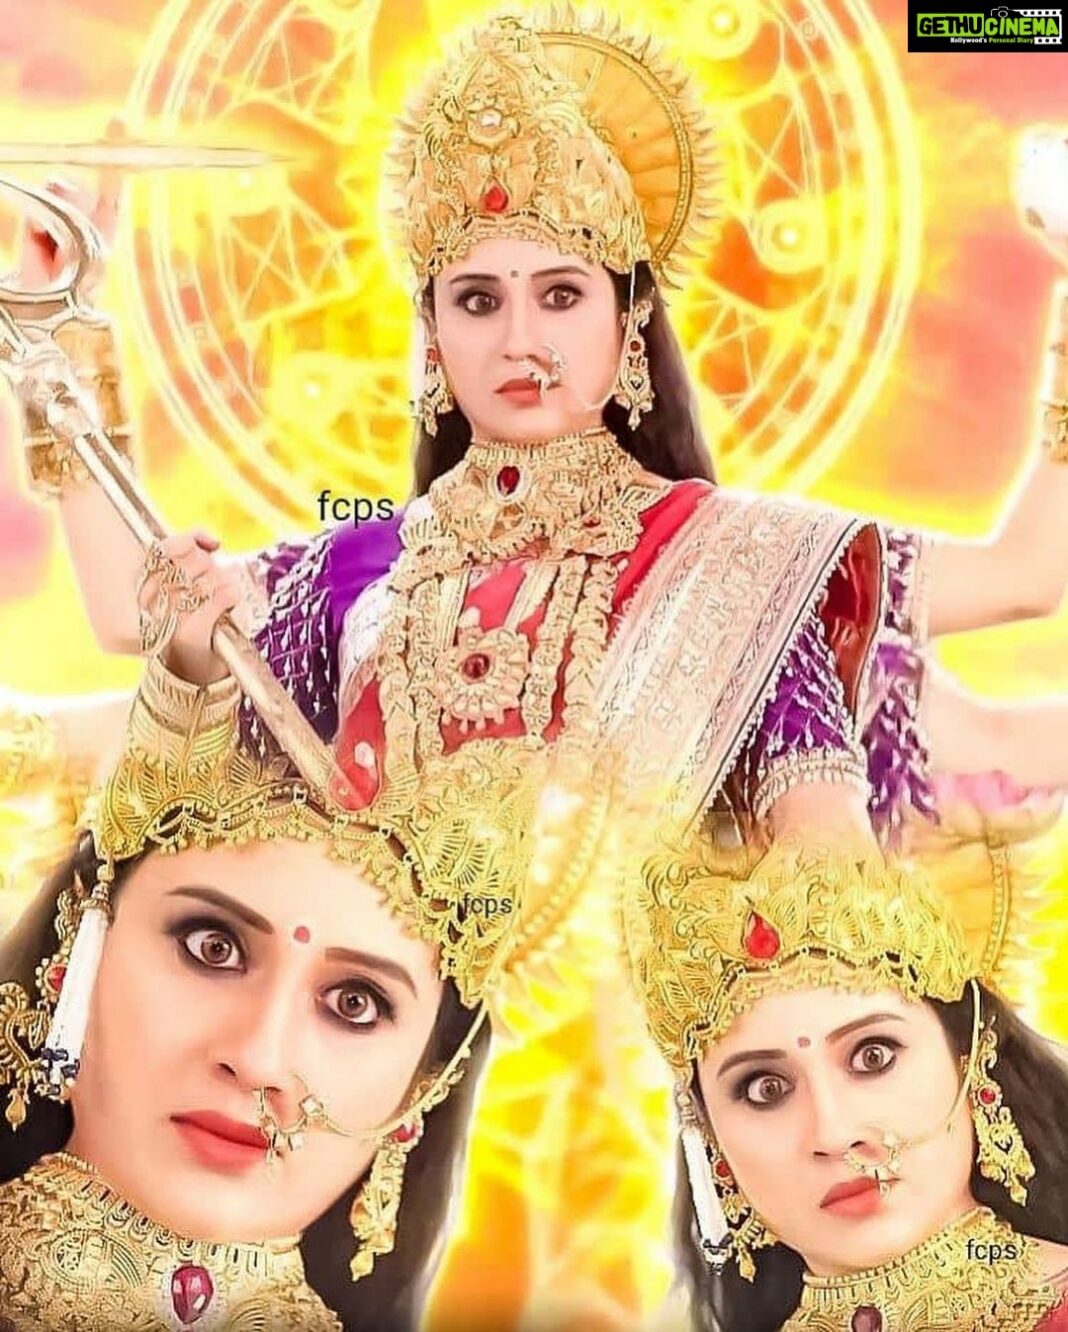 Paridhi Sharma Instagram - Jai Mata Di😊 Let's take blessing of Goddess Power to help us all, to stand tall in this difficult time of pandemic 🙏 All we can promise to ourself is to emerge as better human beings through this time 😊 #happyNavratri #goddesspower #yejungzindgikijitnihai #letswinthisbattleoflife #motivationalthoughts